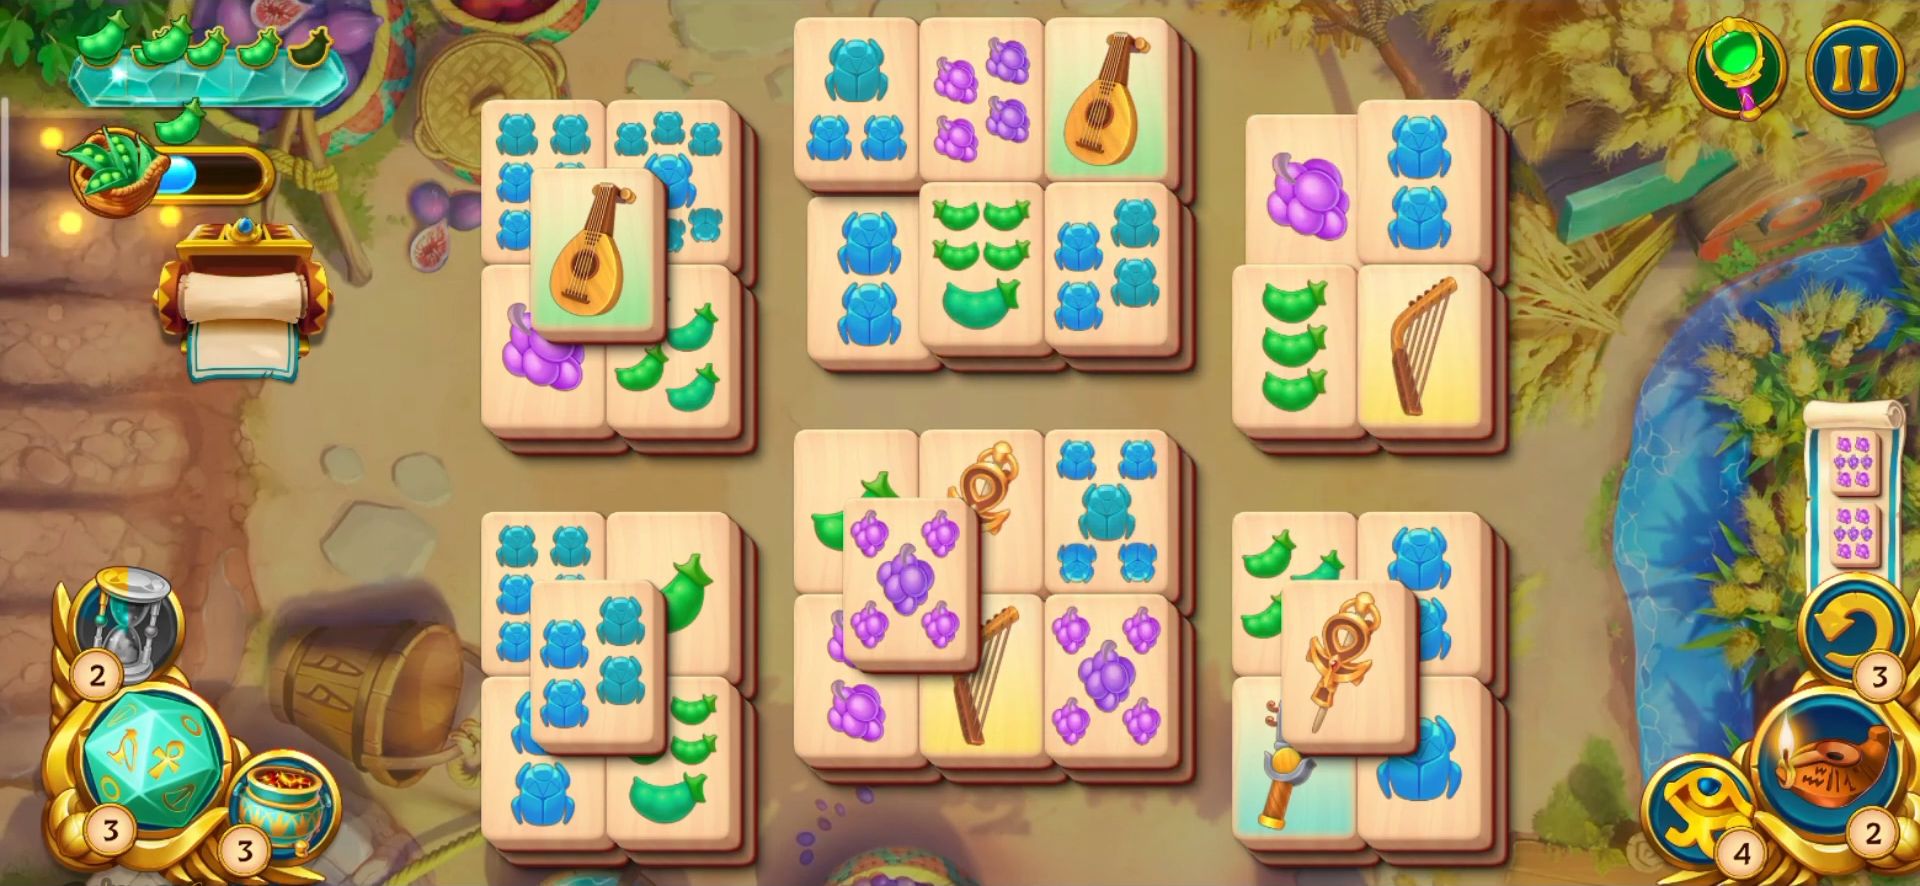 for android instal Mahjong Journey: Tile Matching Puzzle